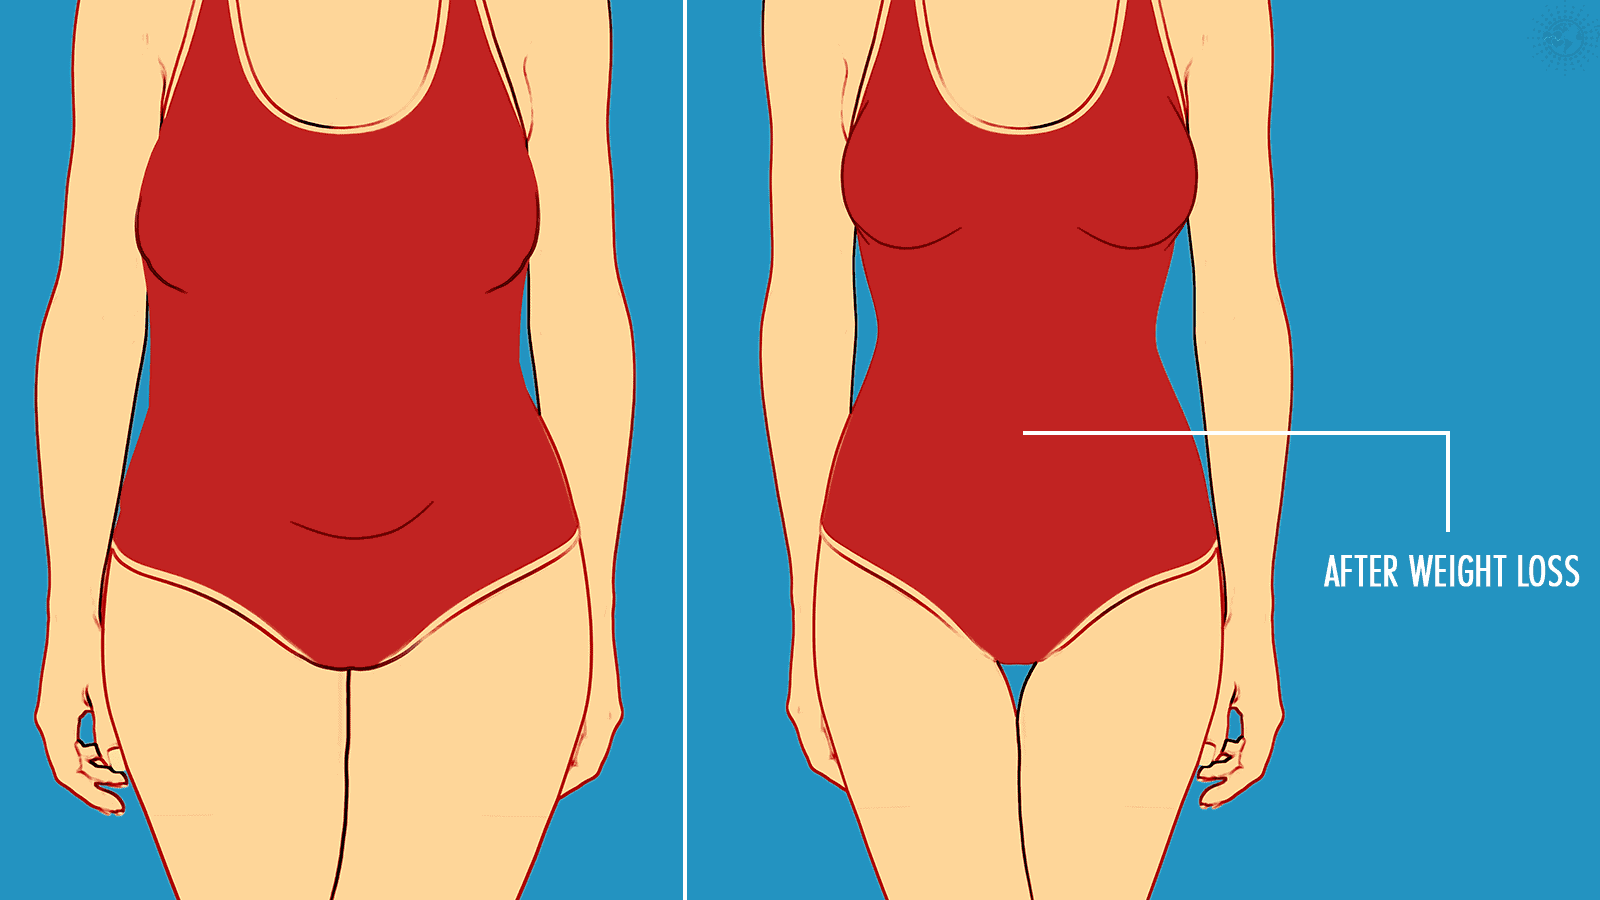 Science Explains 10 Things People Need to Know About Weight Loss